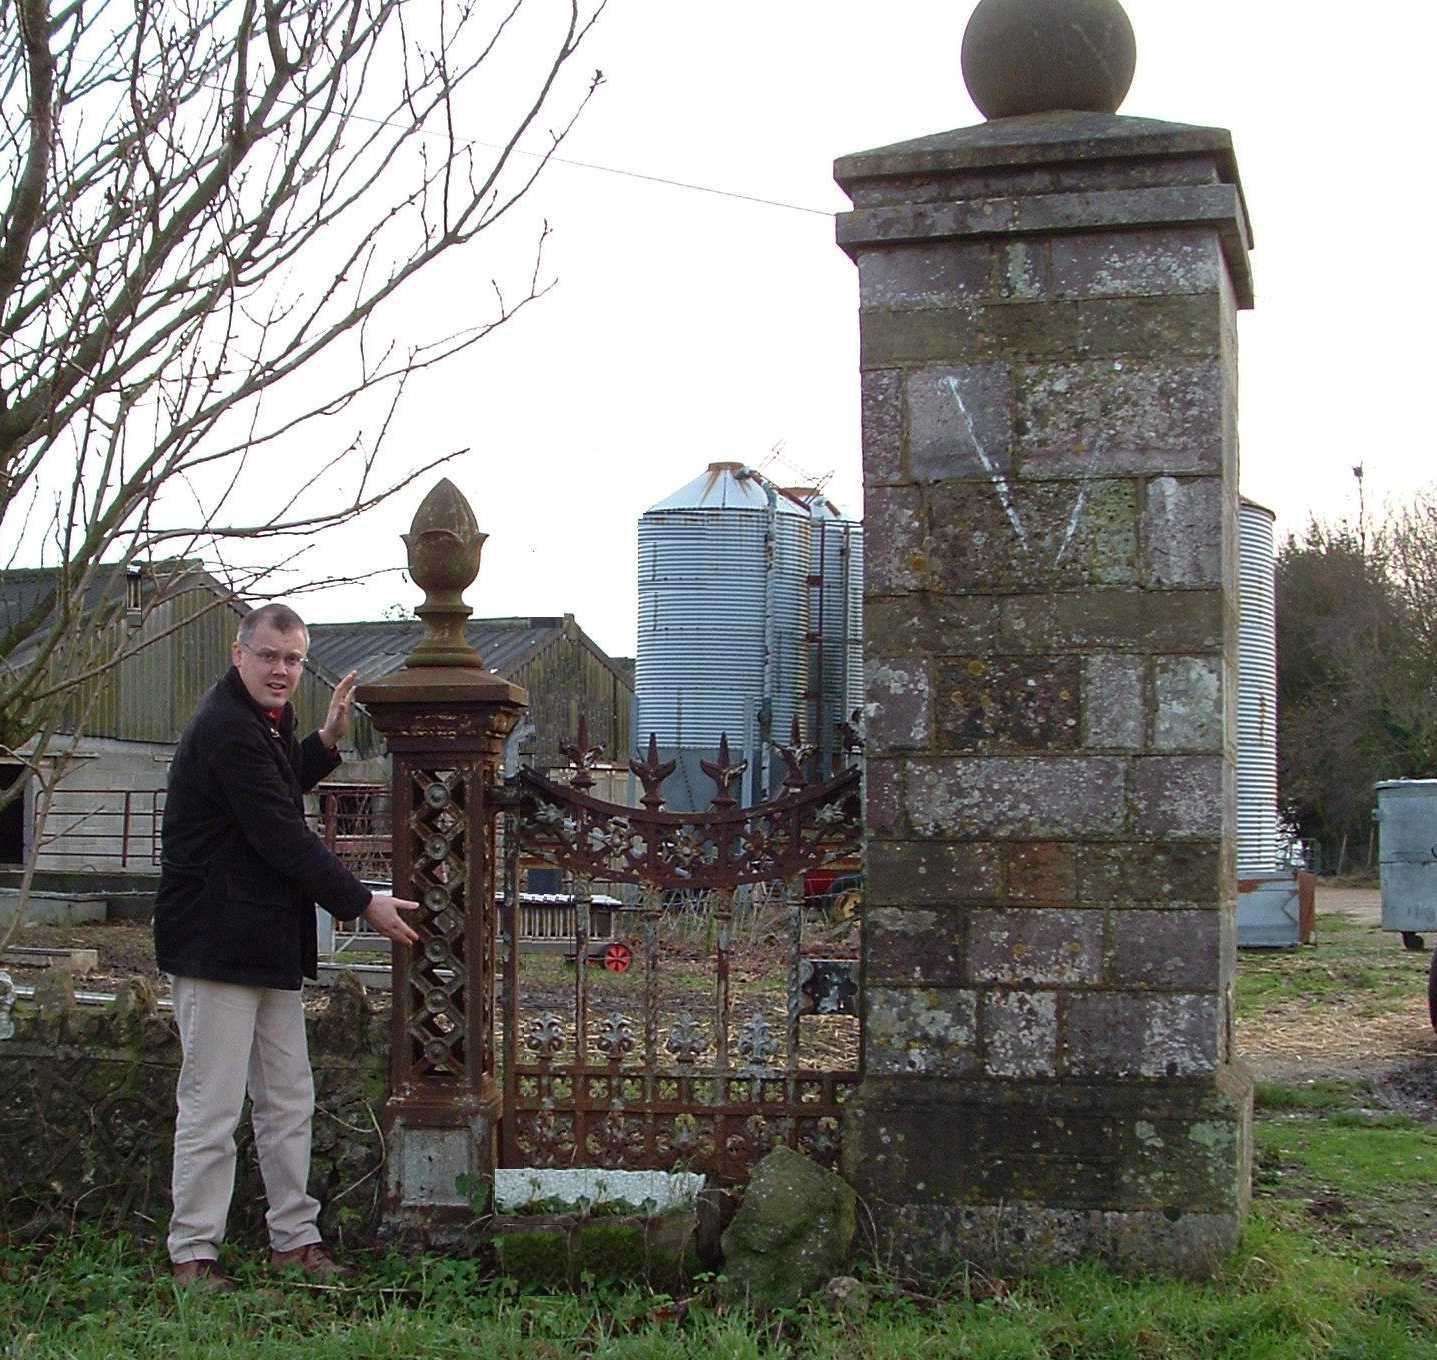 Local historian Jeff Howe next to one of the gates, near Lenham, which are believed to have originally been on the Promenade Pier at Dover